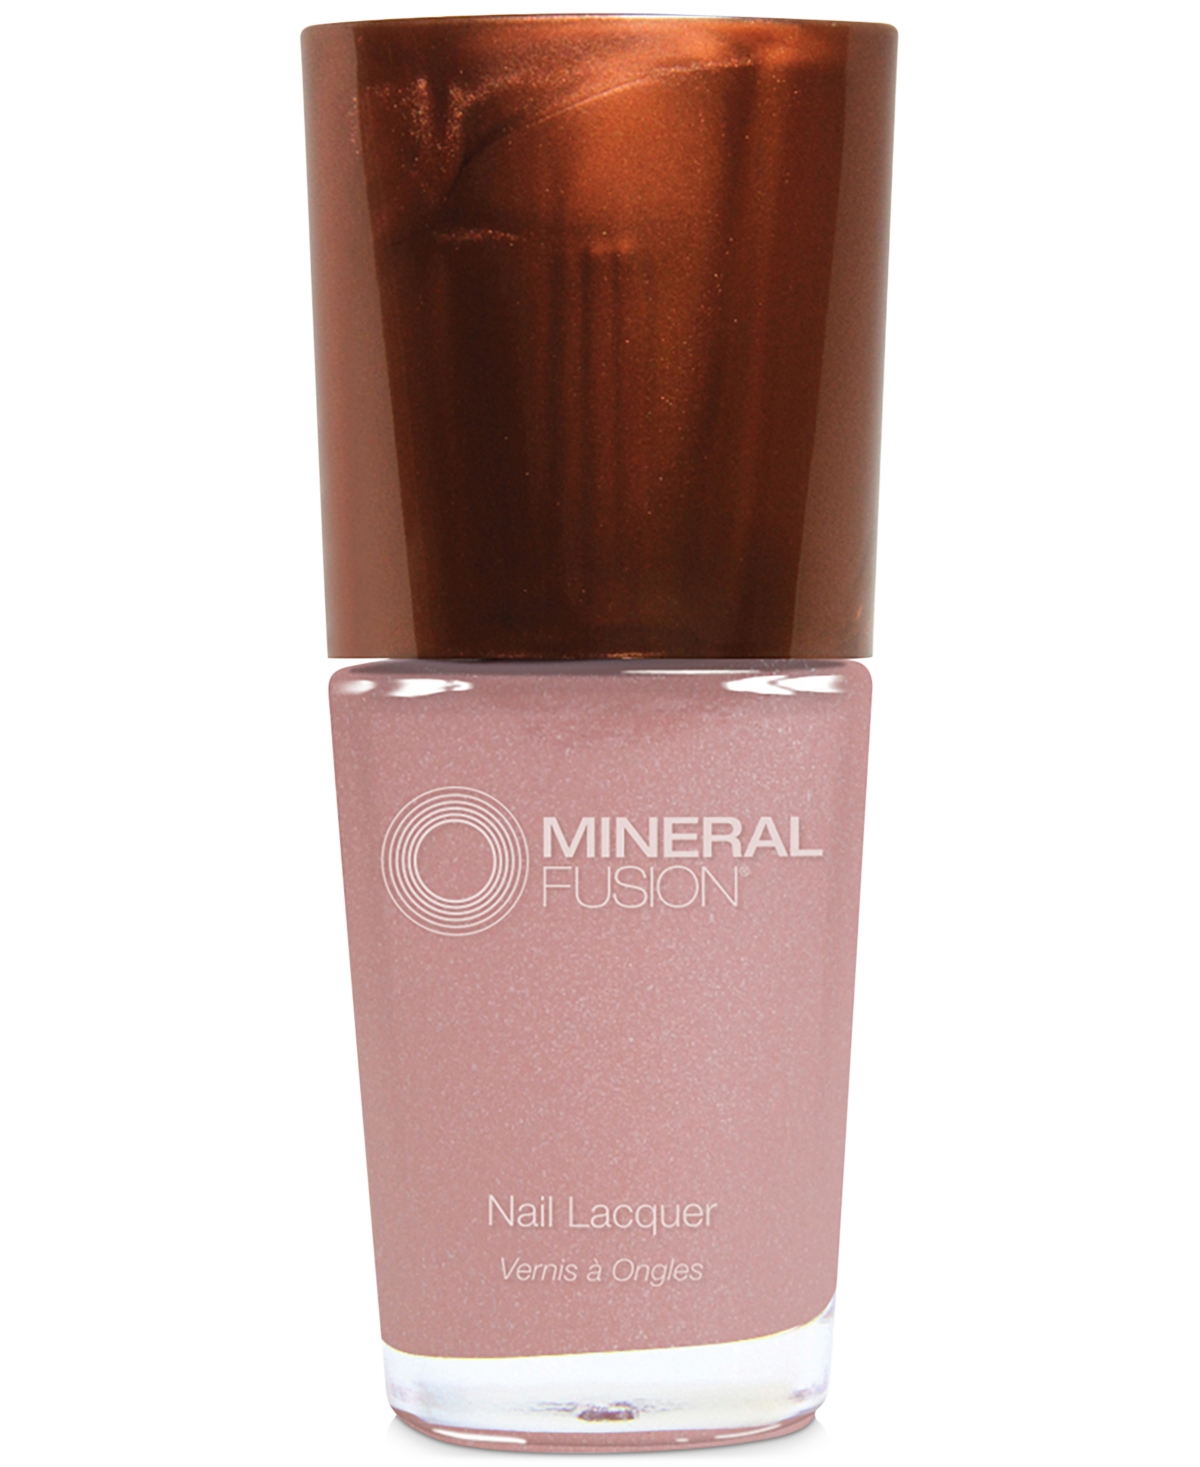 Mineral Fusion Nail Lacquer In Tiara (nude Pink,shimmer Finish)